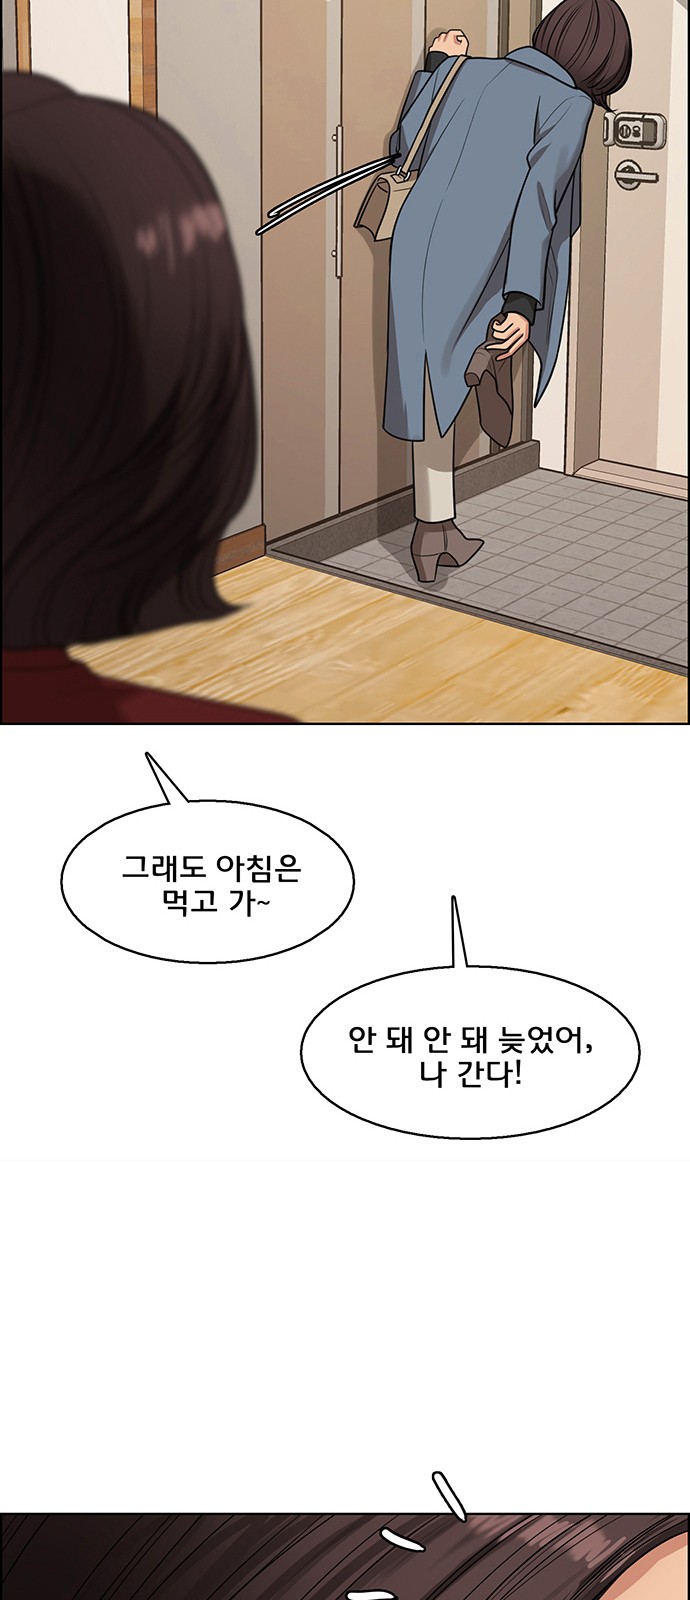 True Beauty - Chapter 242 - Page 2